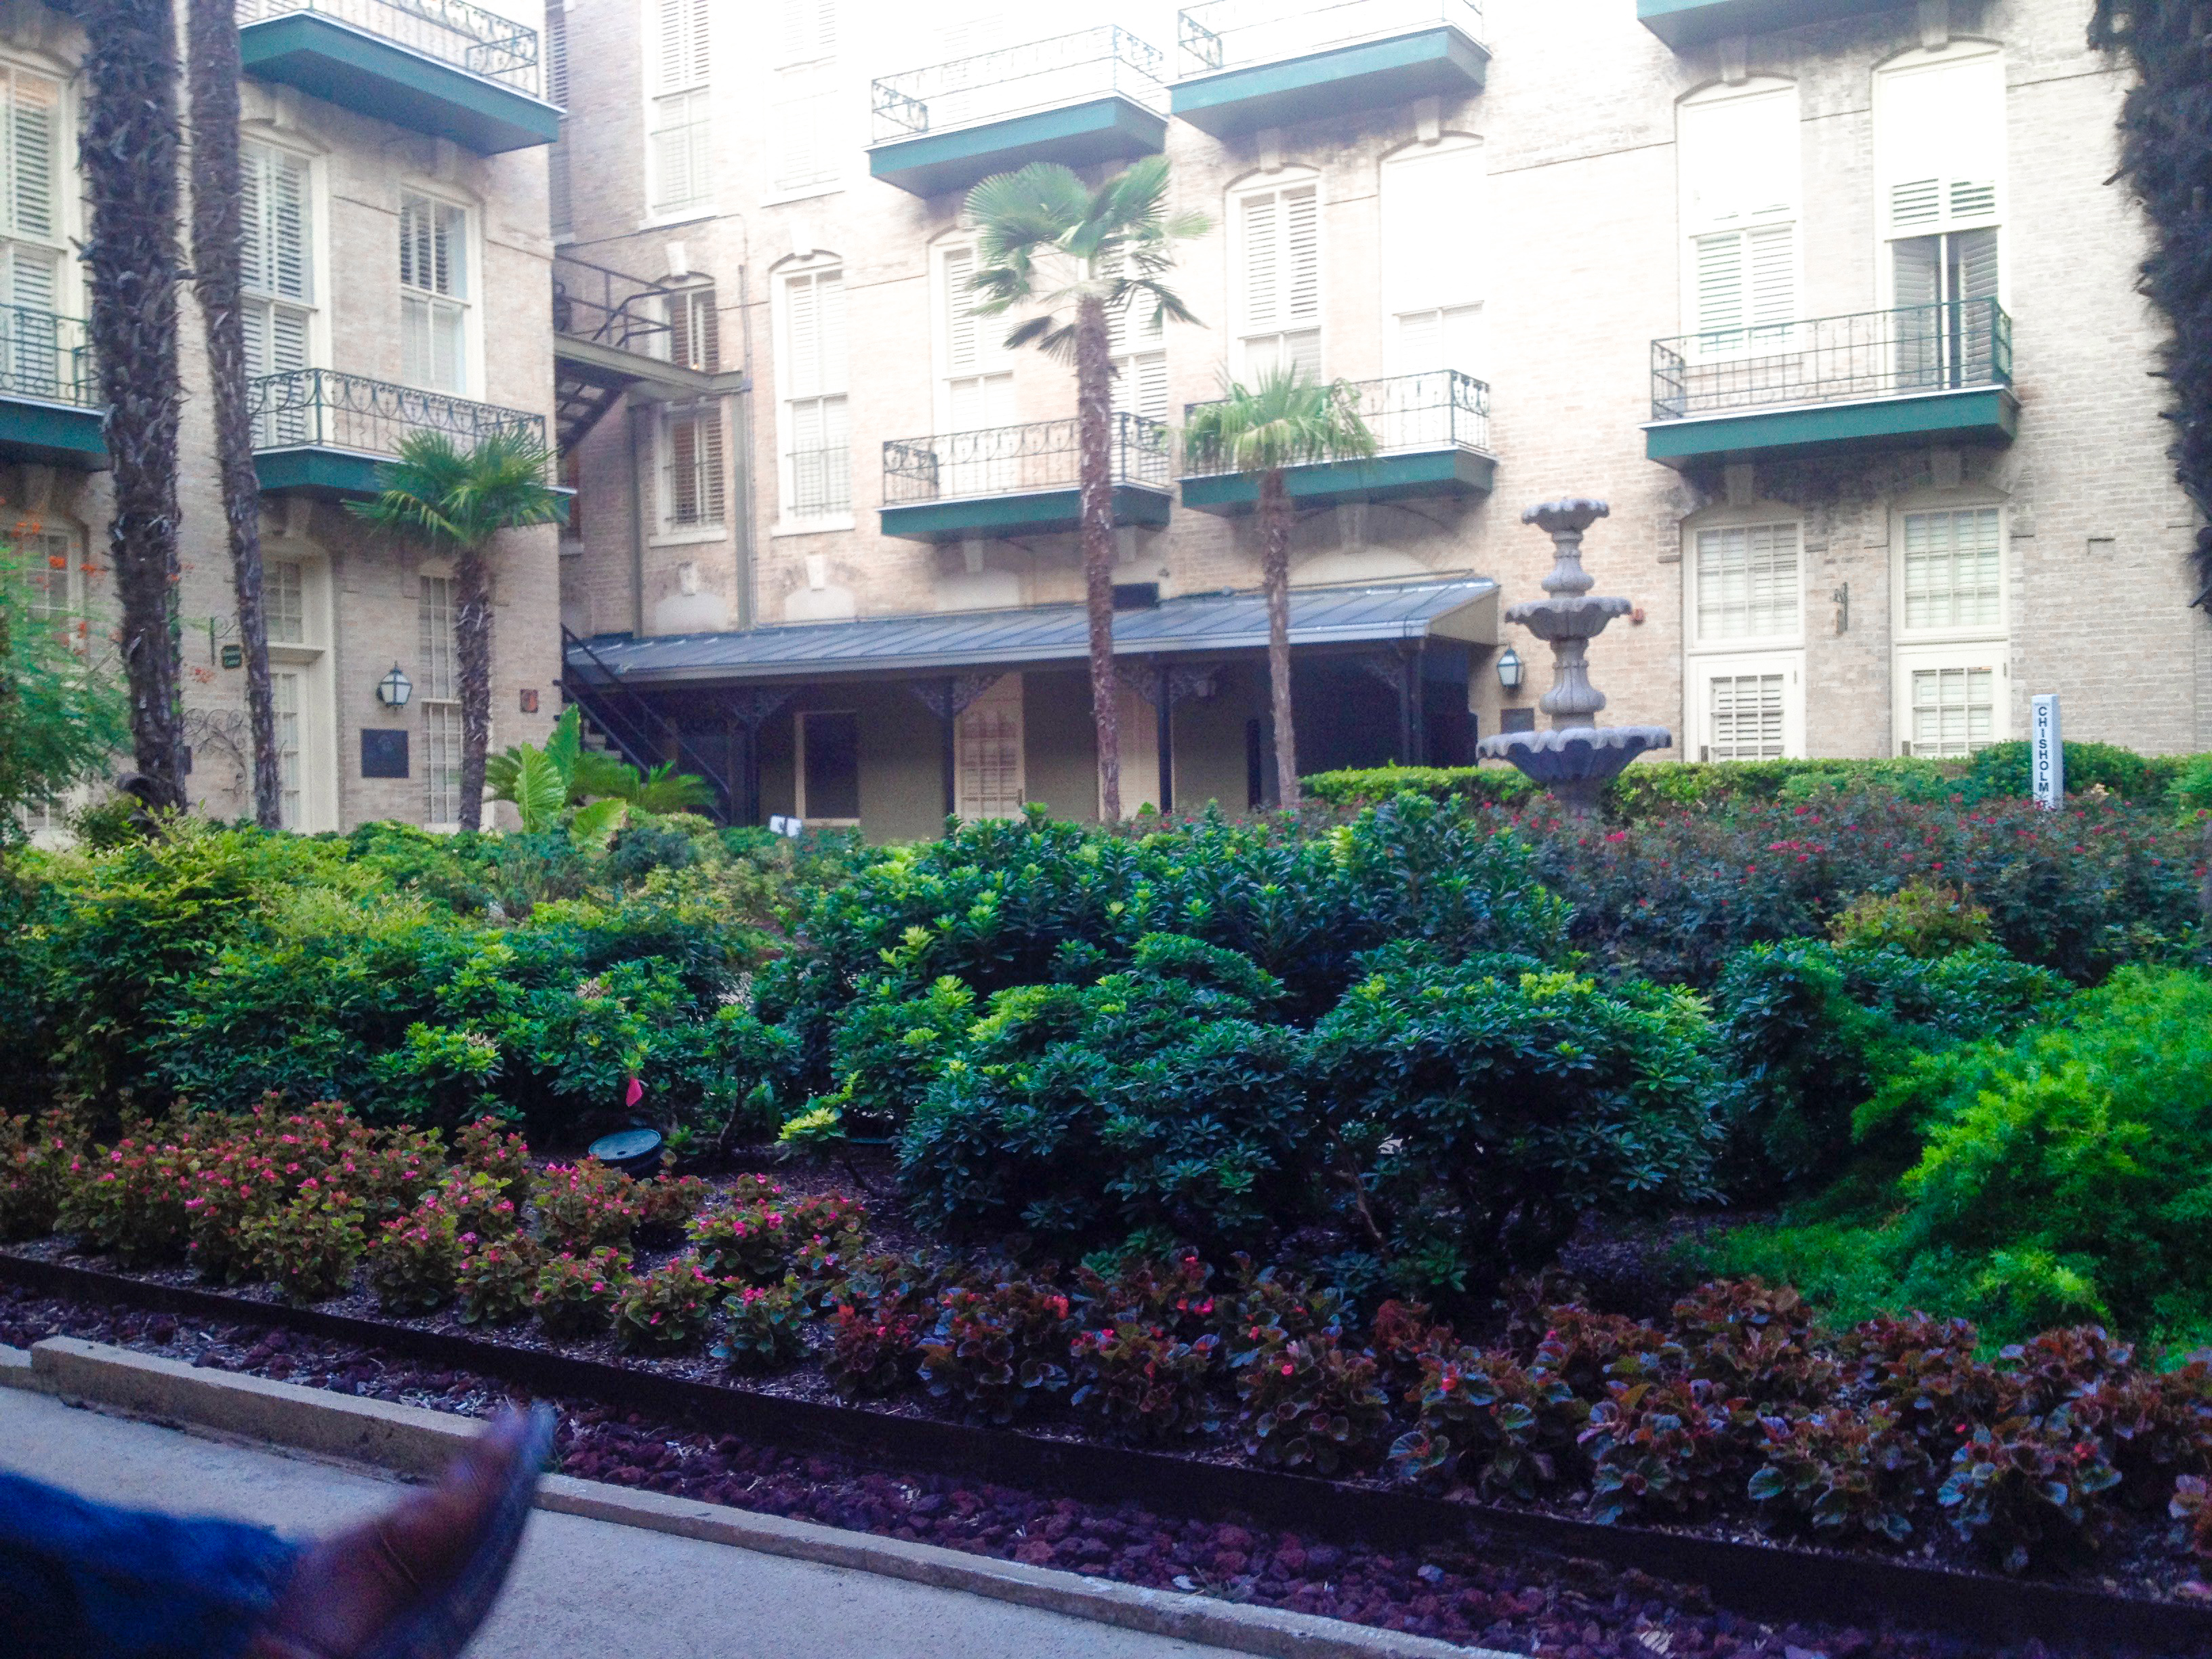 An image of the courtyard at the Menger Hotel.